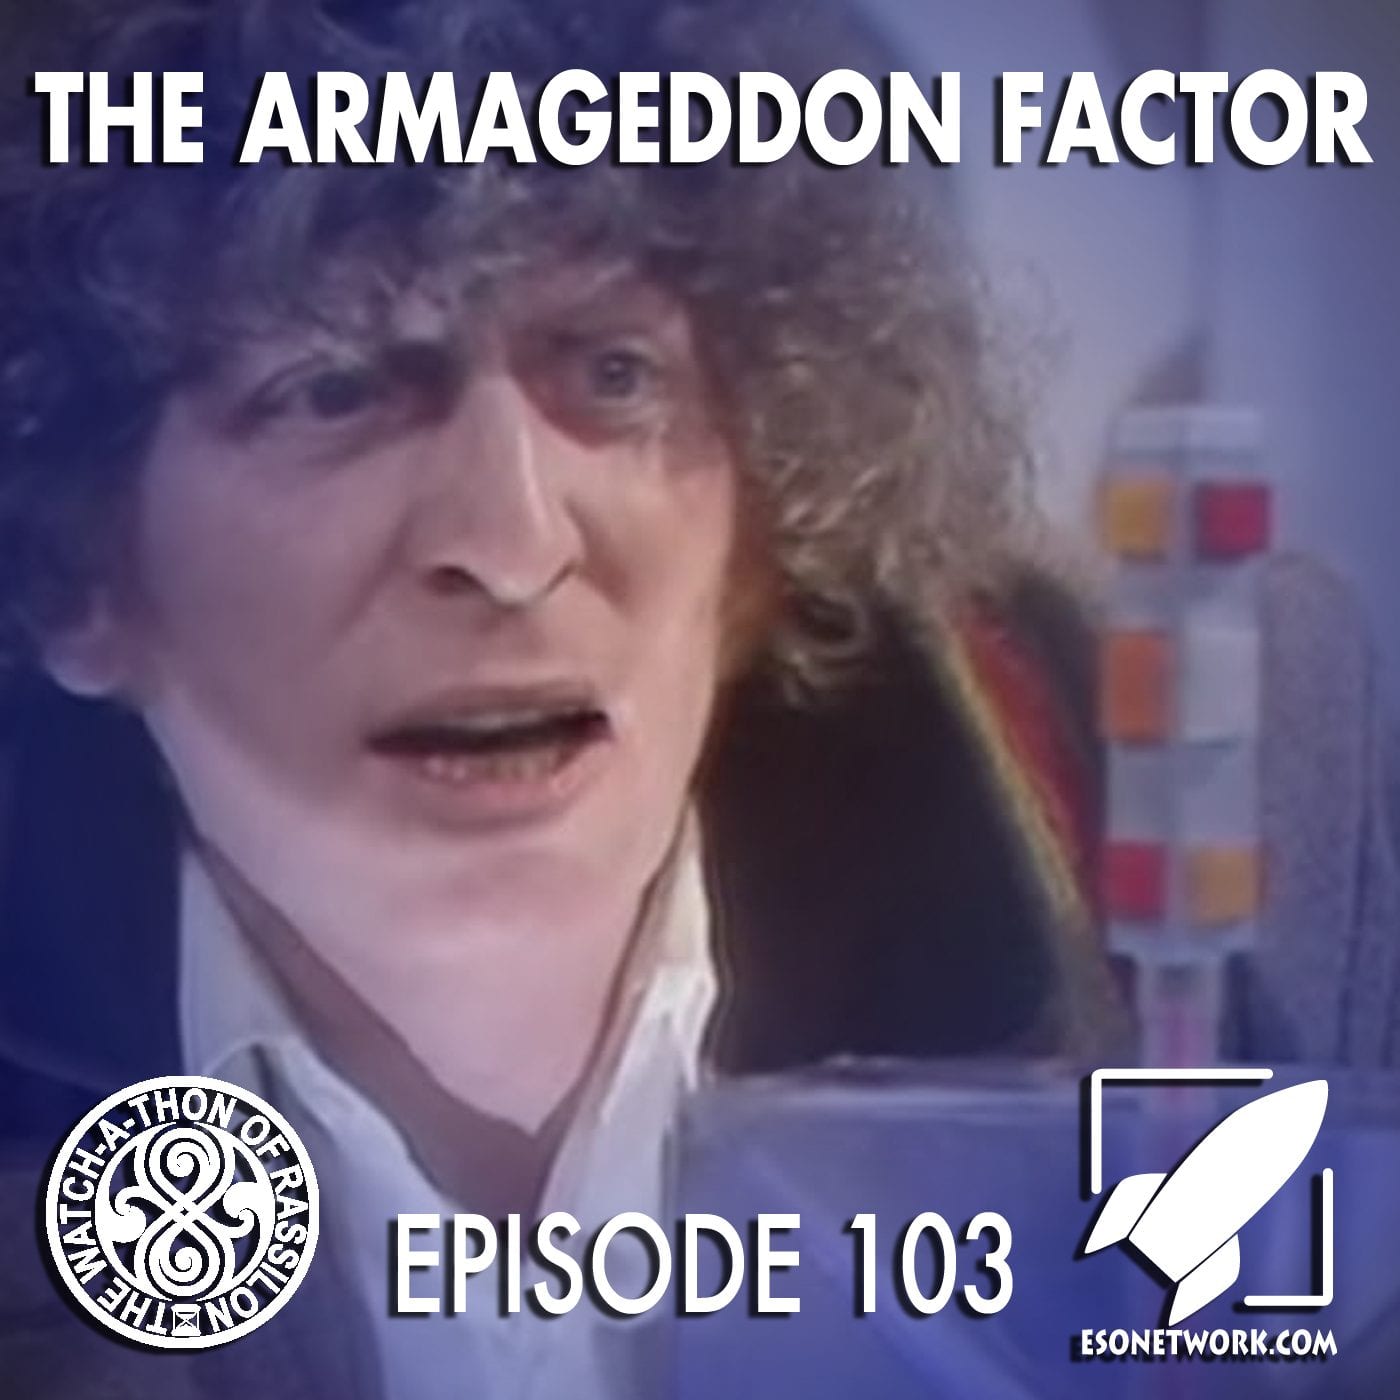 The Watch-A-Thon of Rassilon: Episode 103: The Armageddon Factor